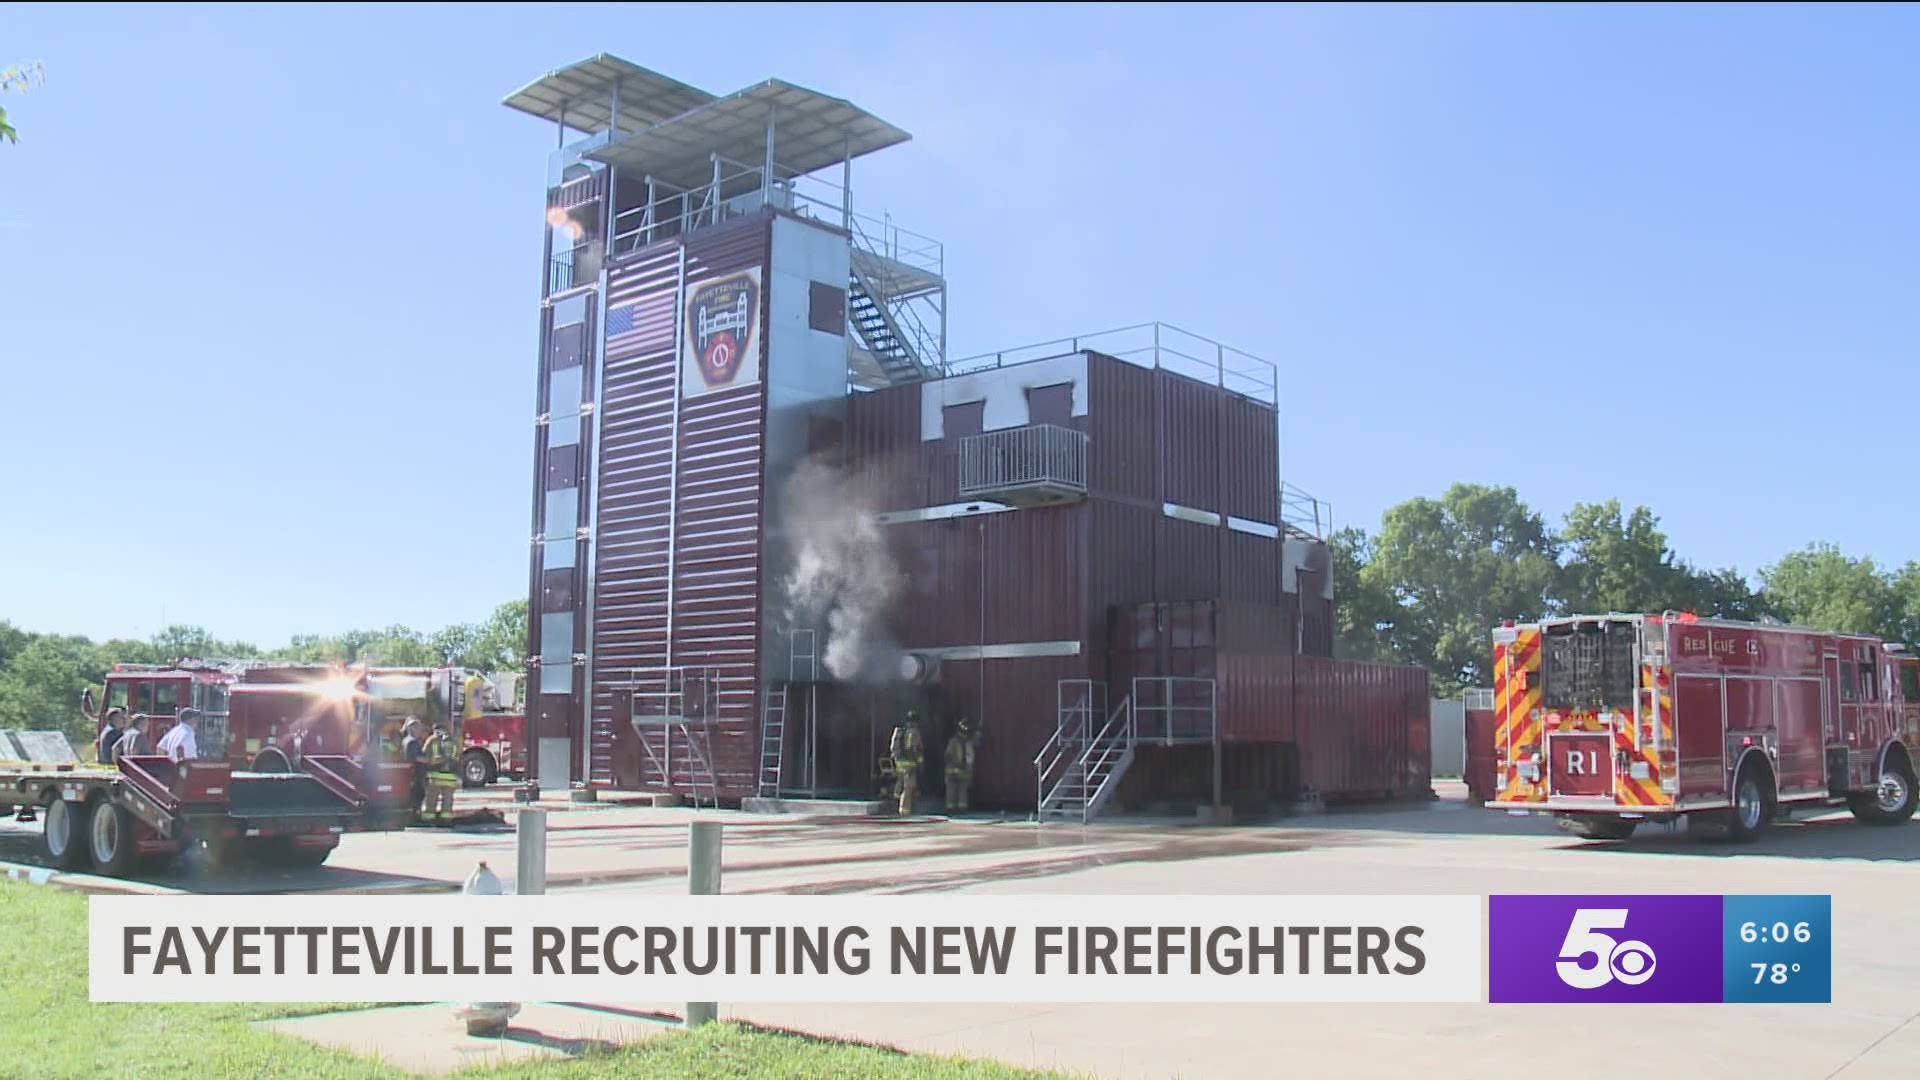 The Fayetteville Fire Department is looking to add some new first responders to their team.